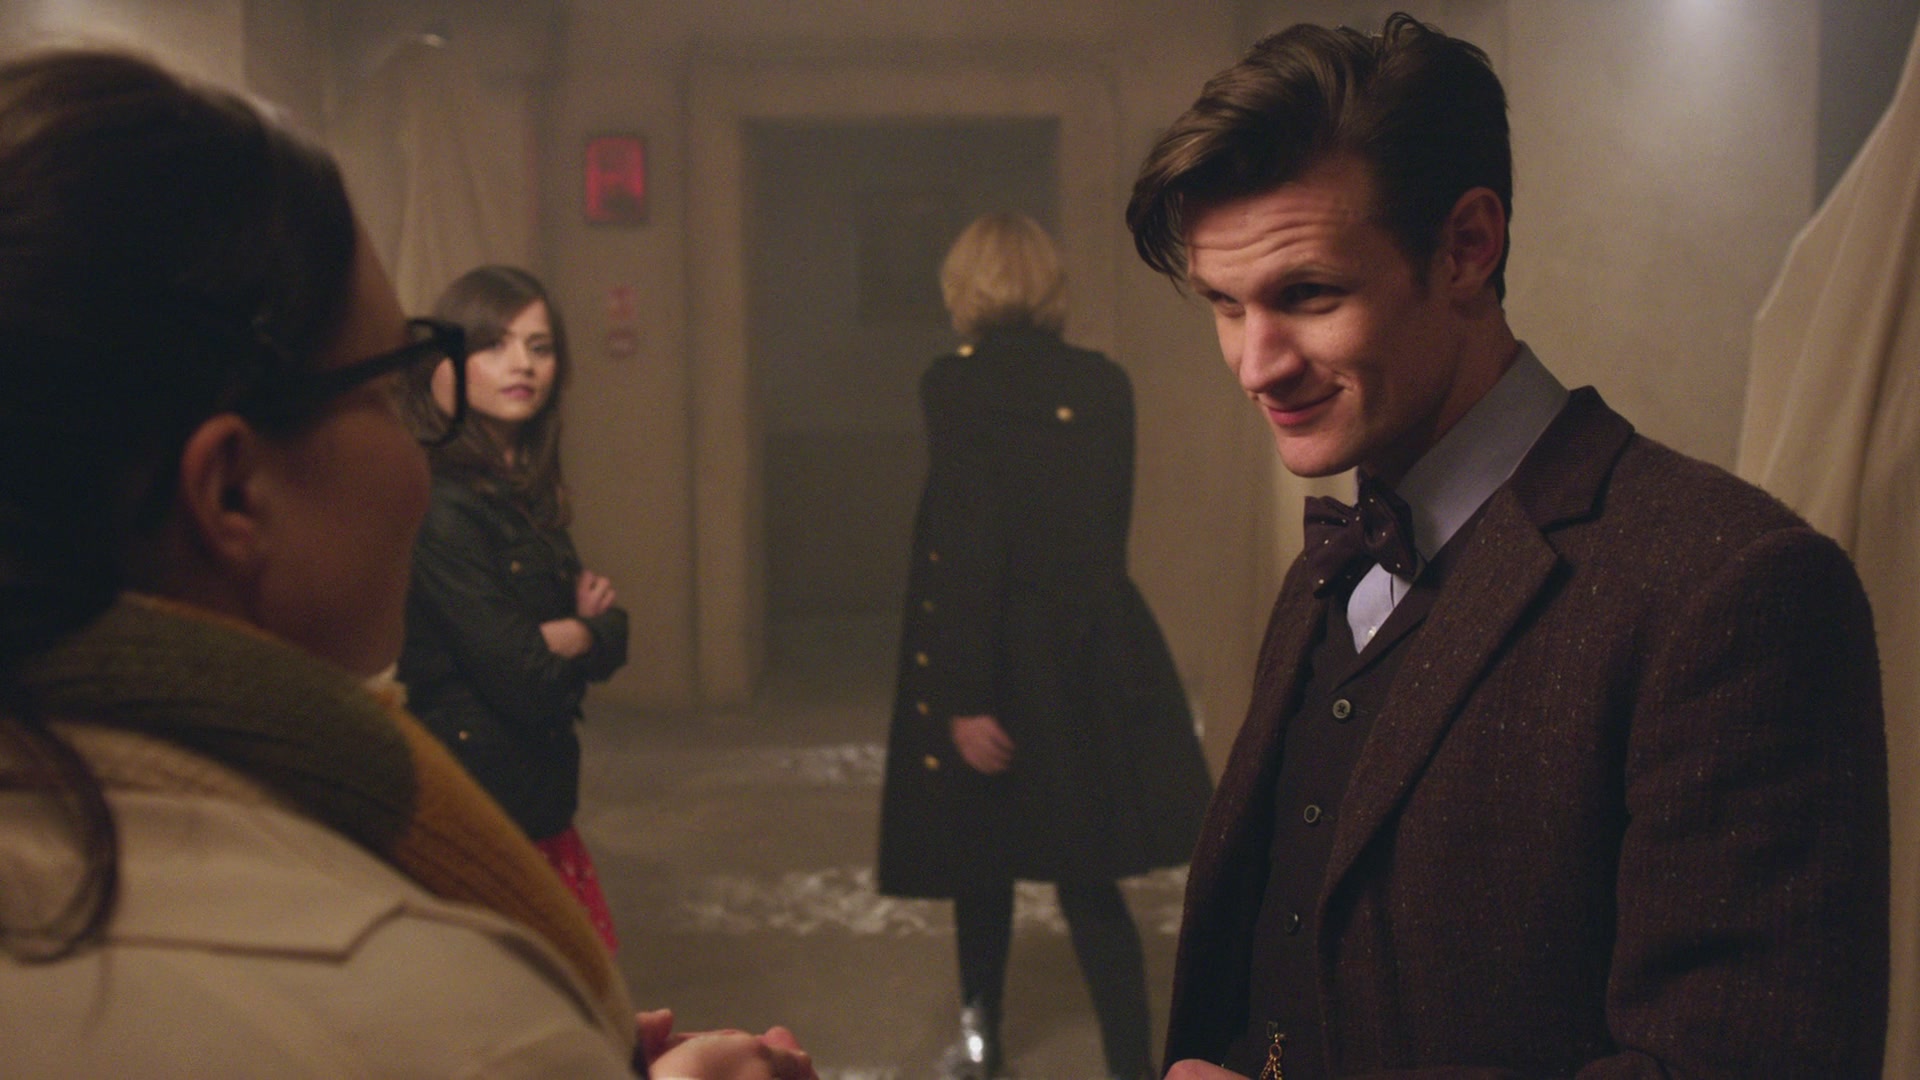 DayOfTheDoctor-Caps-0339.jpg